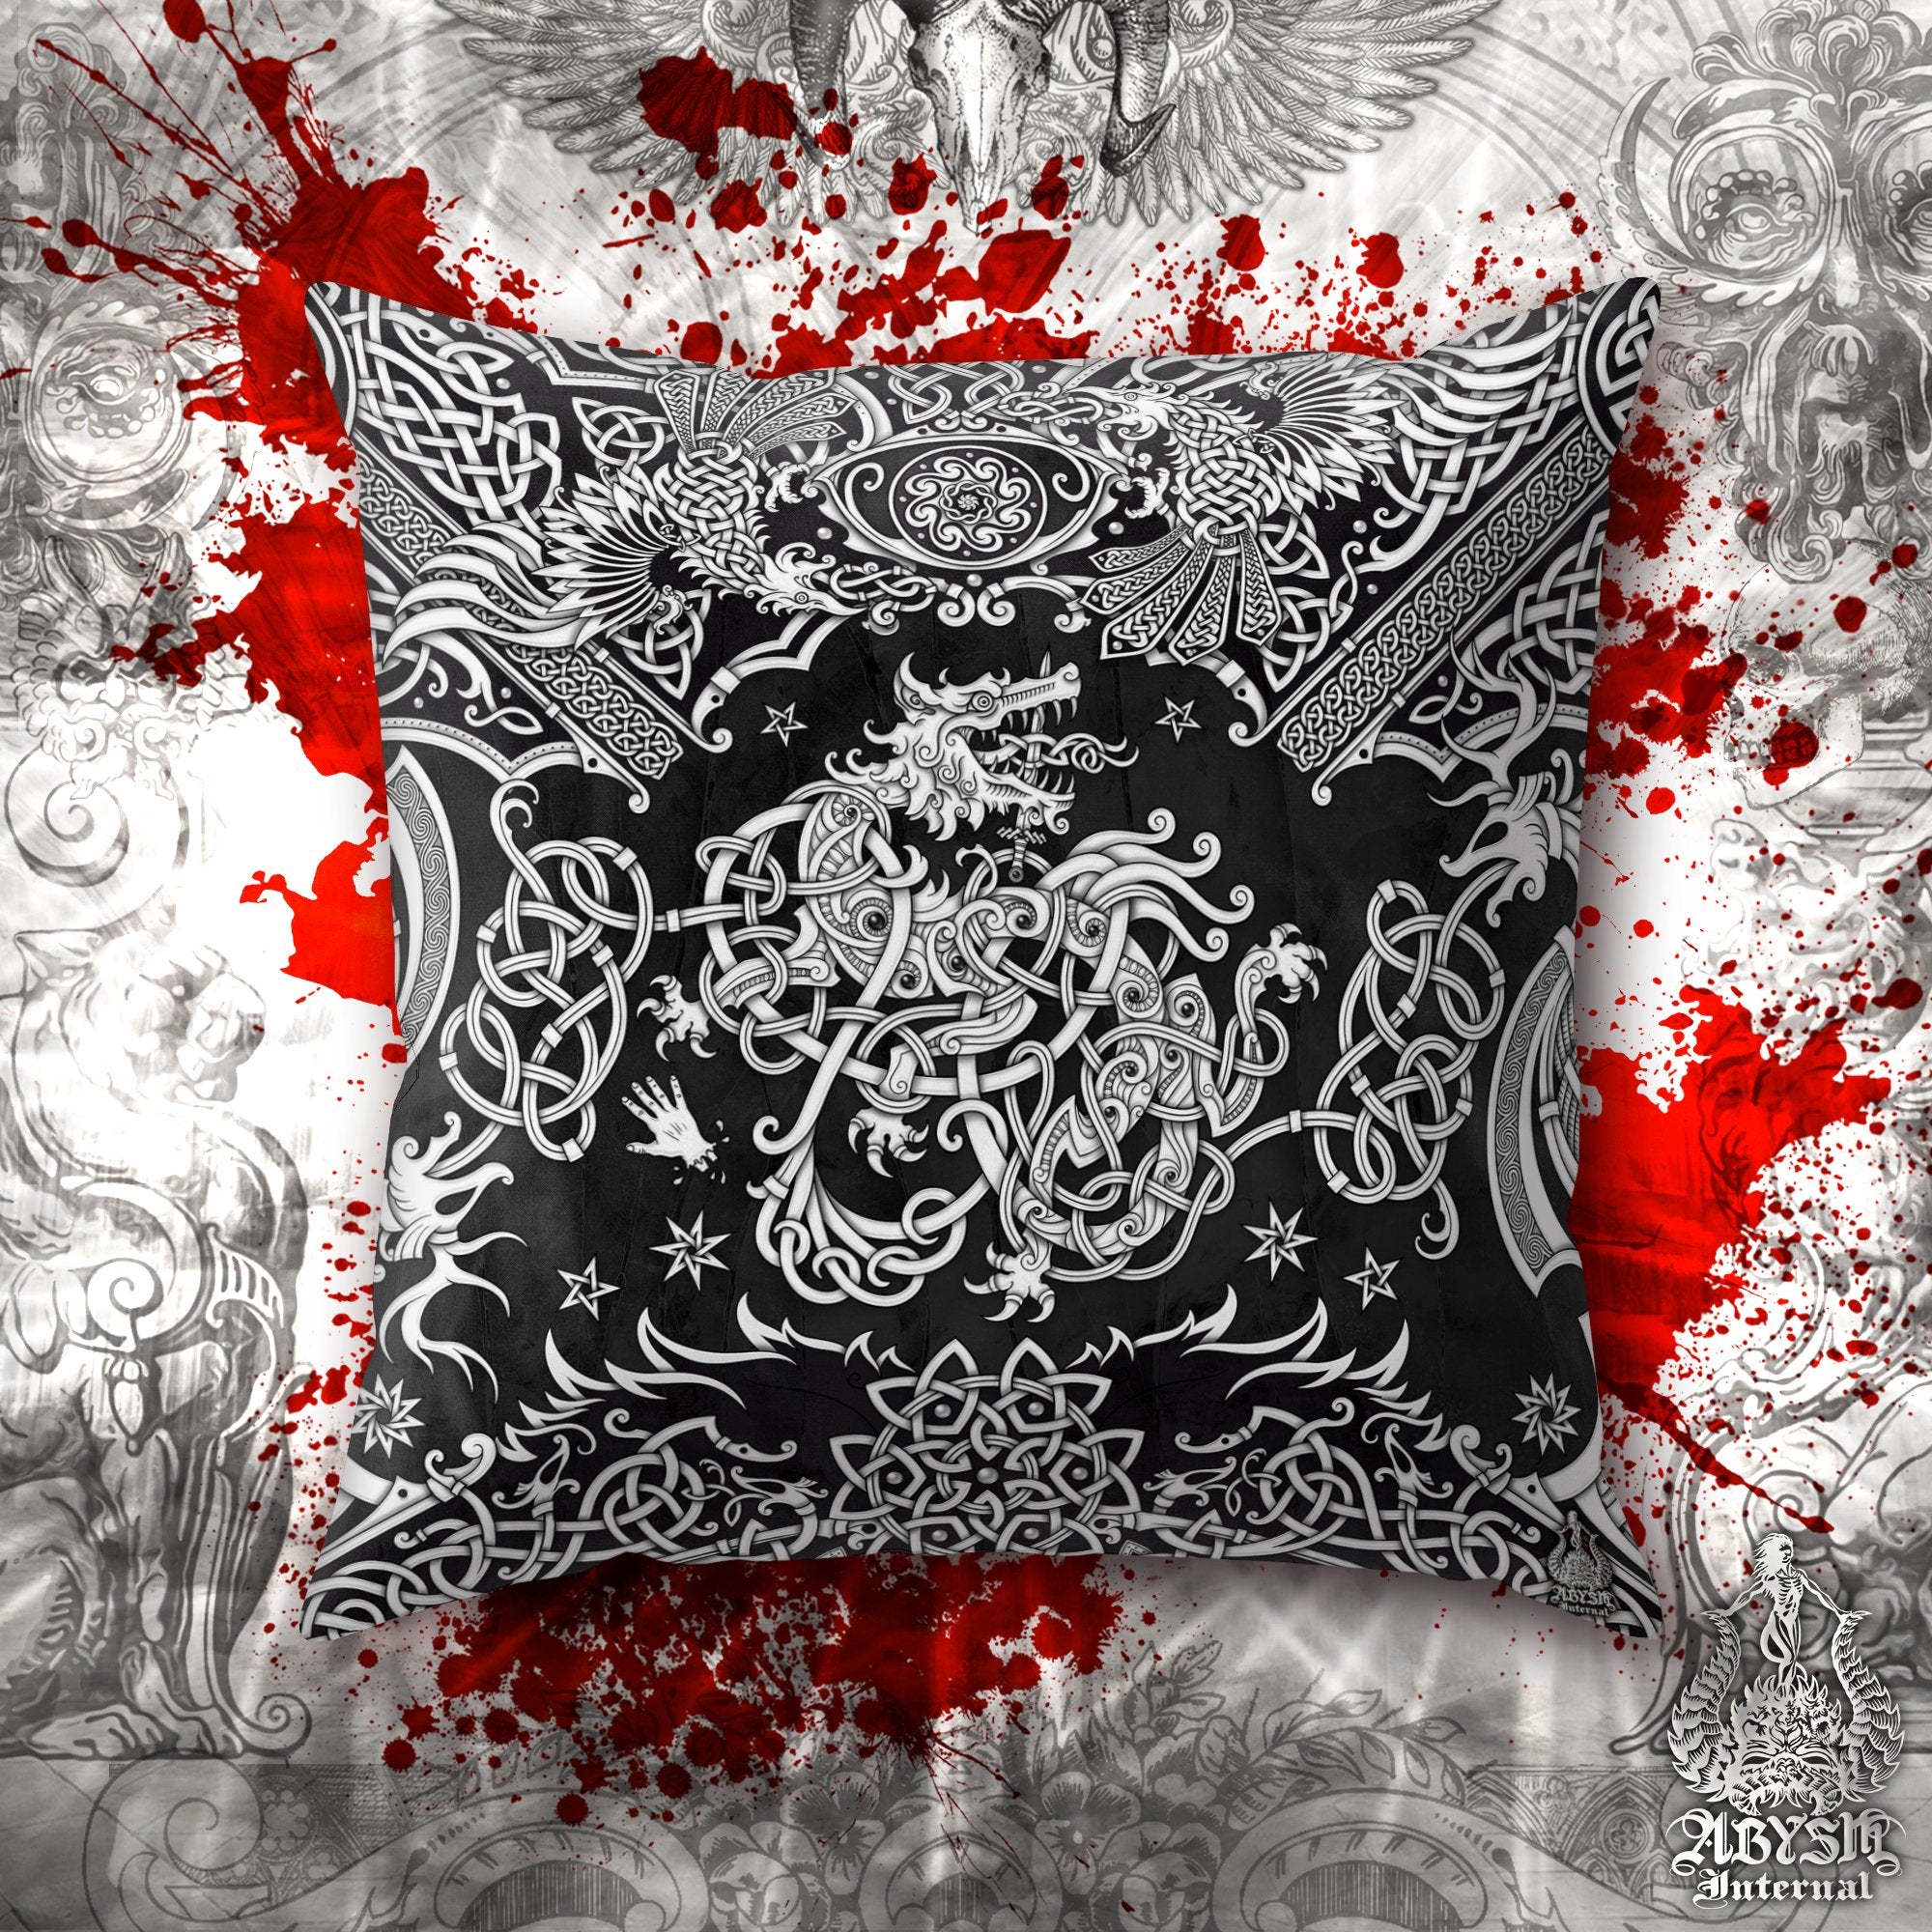 Fenrir Throw Pillow, Decorative Accent Pillow, Square Cushion Cover, Viking Wolf Room Decor, Norse Knotwork, Nordic Art, Alternative Home - White & 3 Colors - Abysm Internal